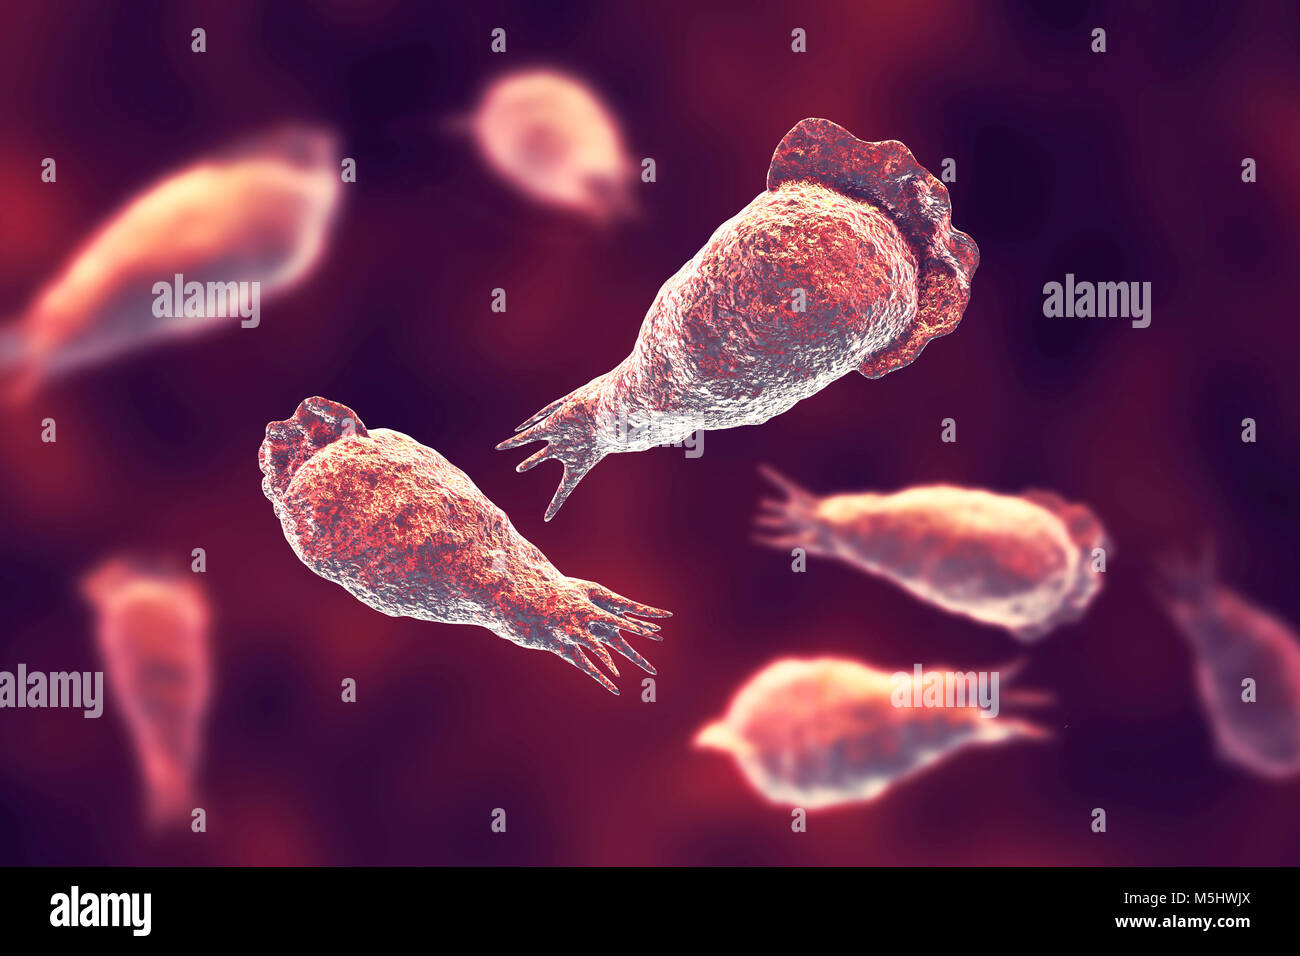 Brain-eating amoeba Naegleria fowleri protozoans in trophozite form, computer illustration. This organism is an opportunistic pathogen of humans, causing meningoencephalitis (inflammation of the brain and its surrounding membranes) when inhaled, often by children swimming in fresh water. Headaches, vomiting, sensory disturbance and a fatal coma may occur if the victim is not treated. Treatment is with antiprotozoal drugs. Infectious stage for humans are trophozoites and flagellate form. Stock Photo